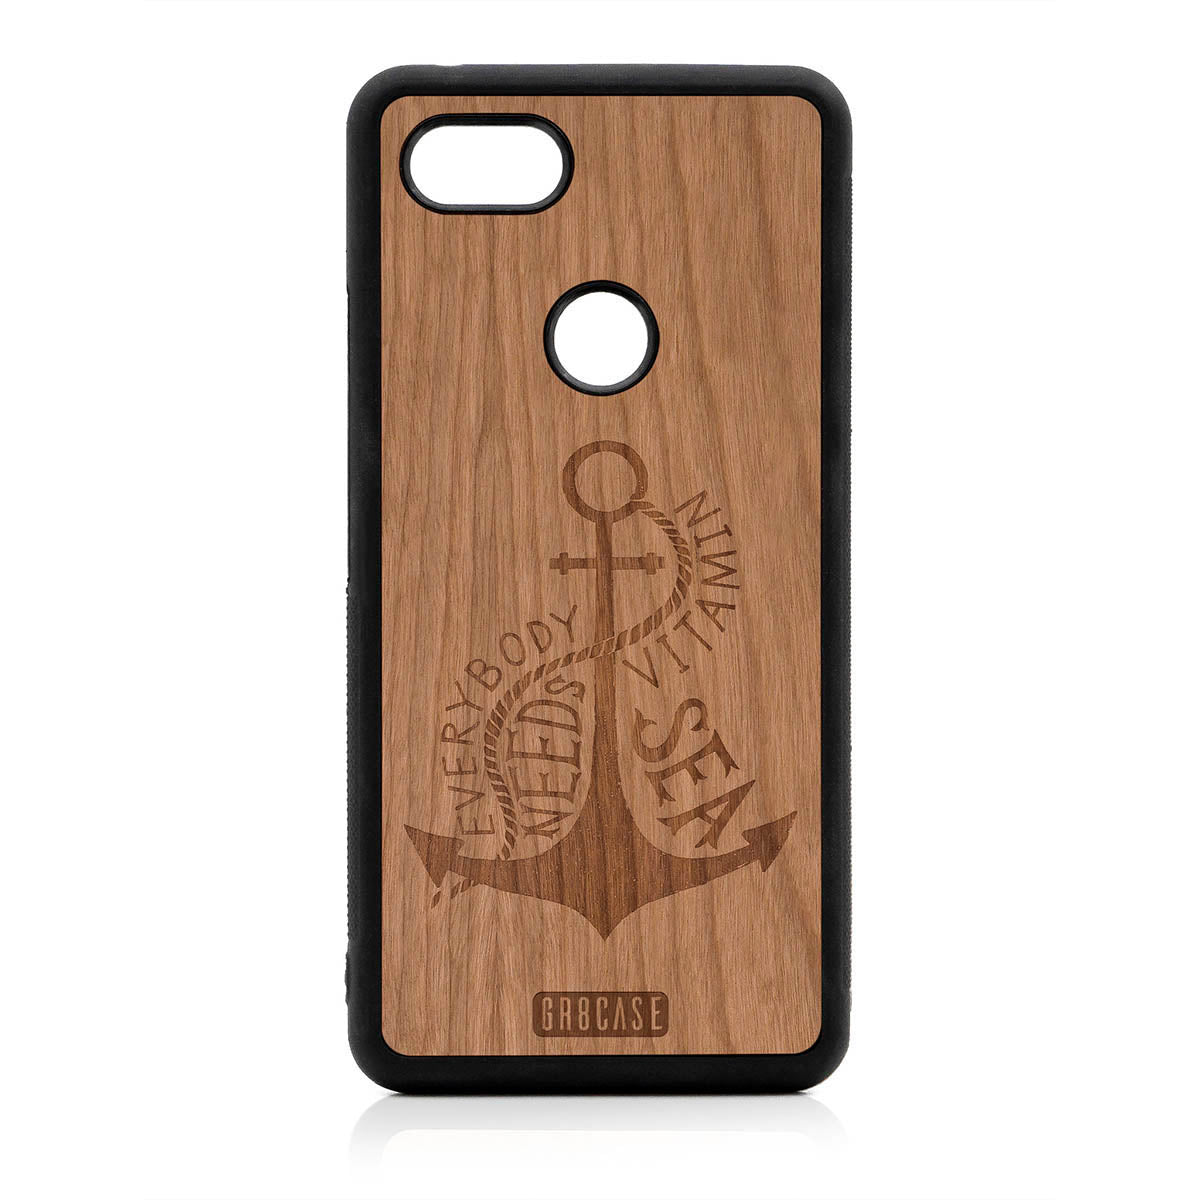 Everybody Needs Vitamin Sea (Anchor) Design Wood Case For Google Pixel 3 XL by GR8CASE